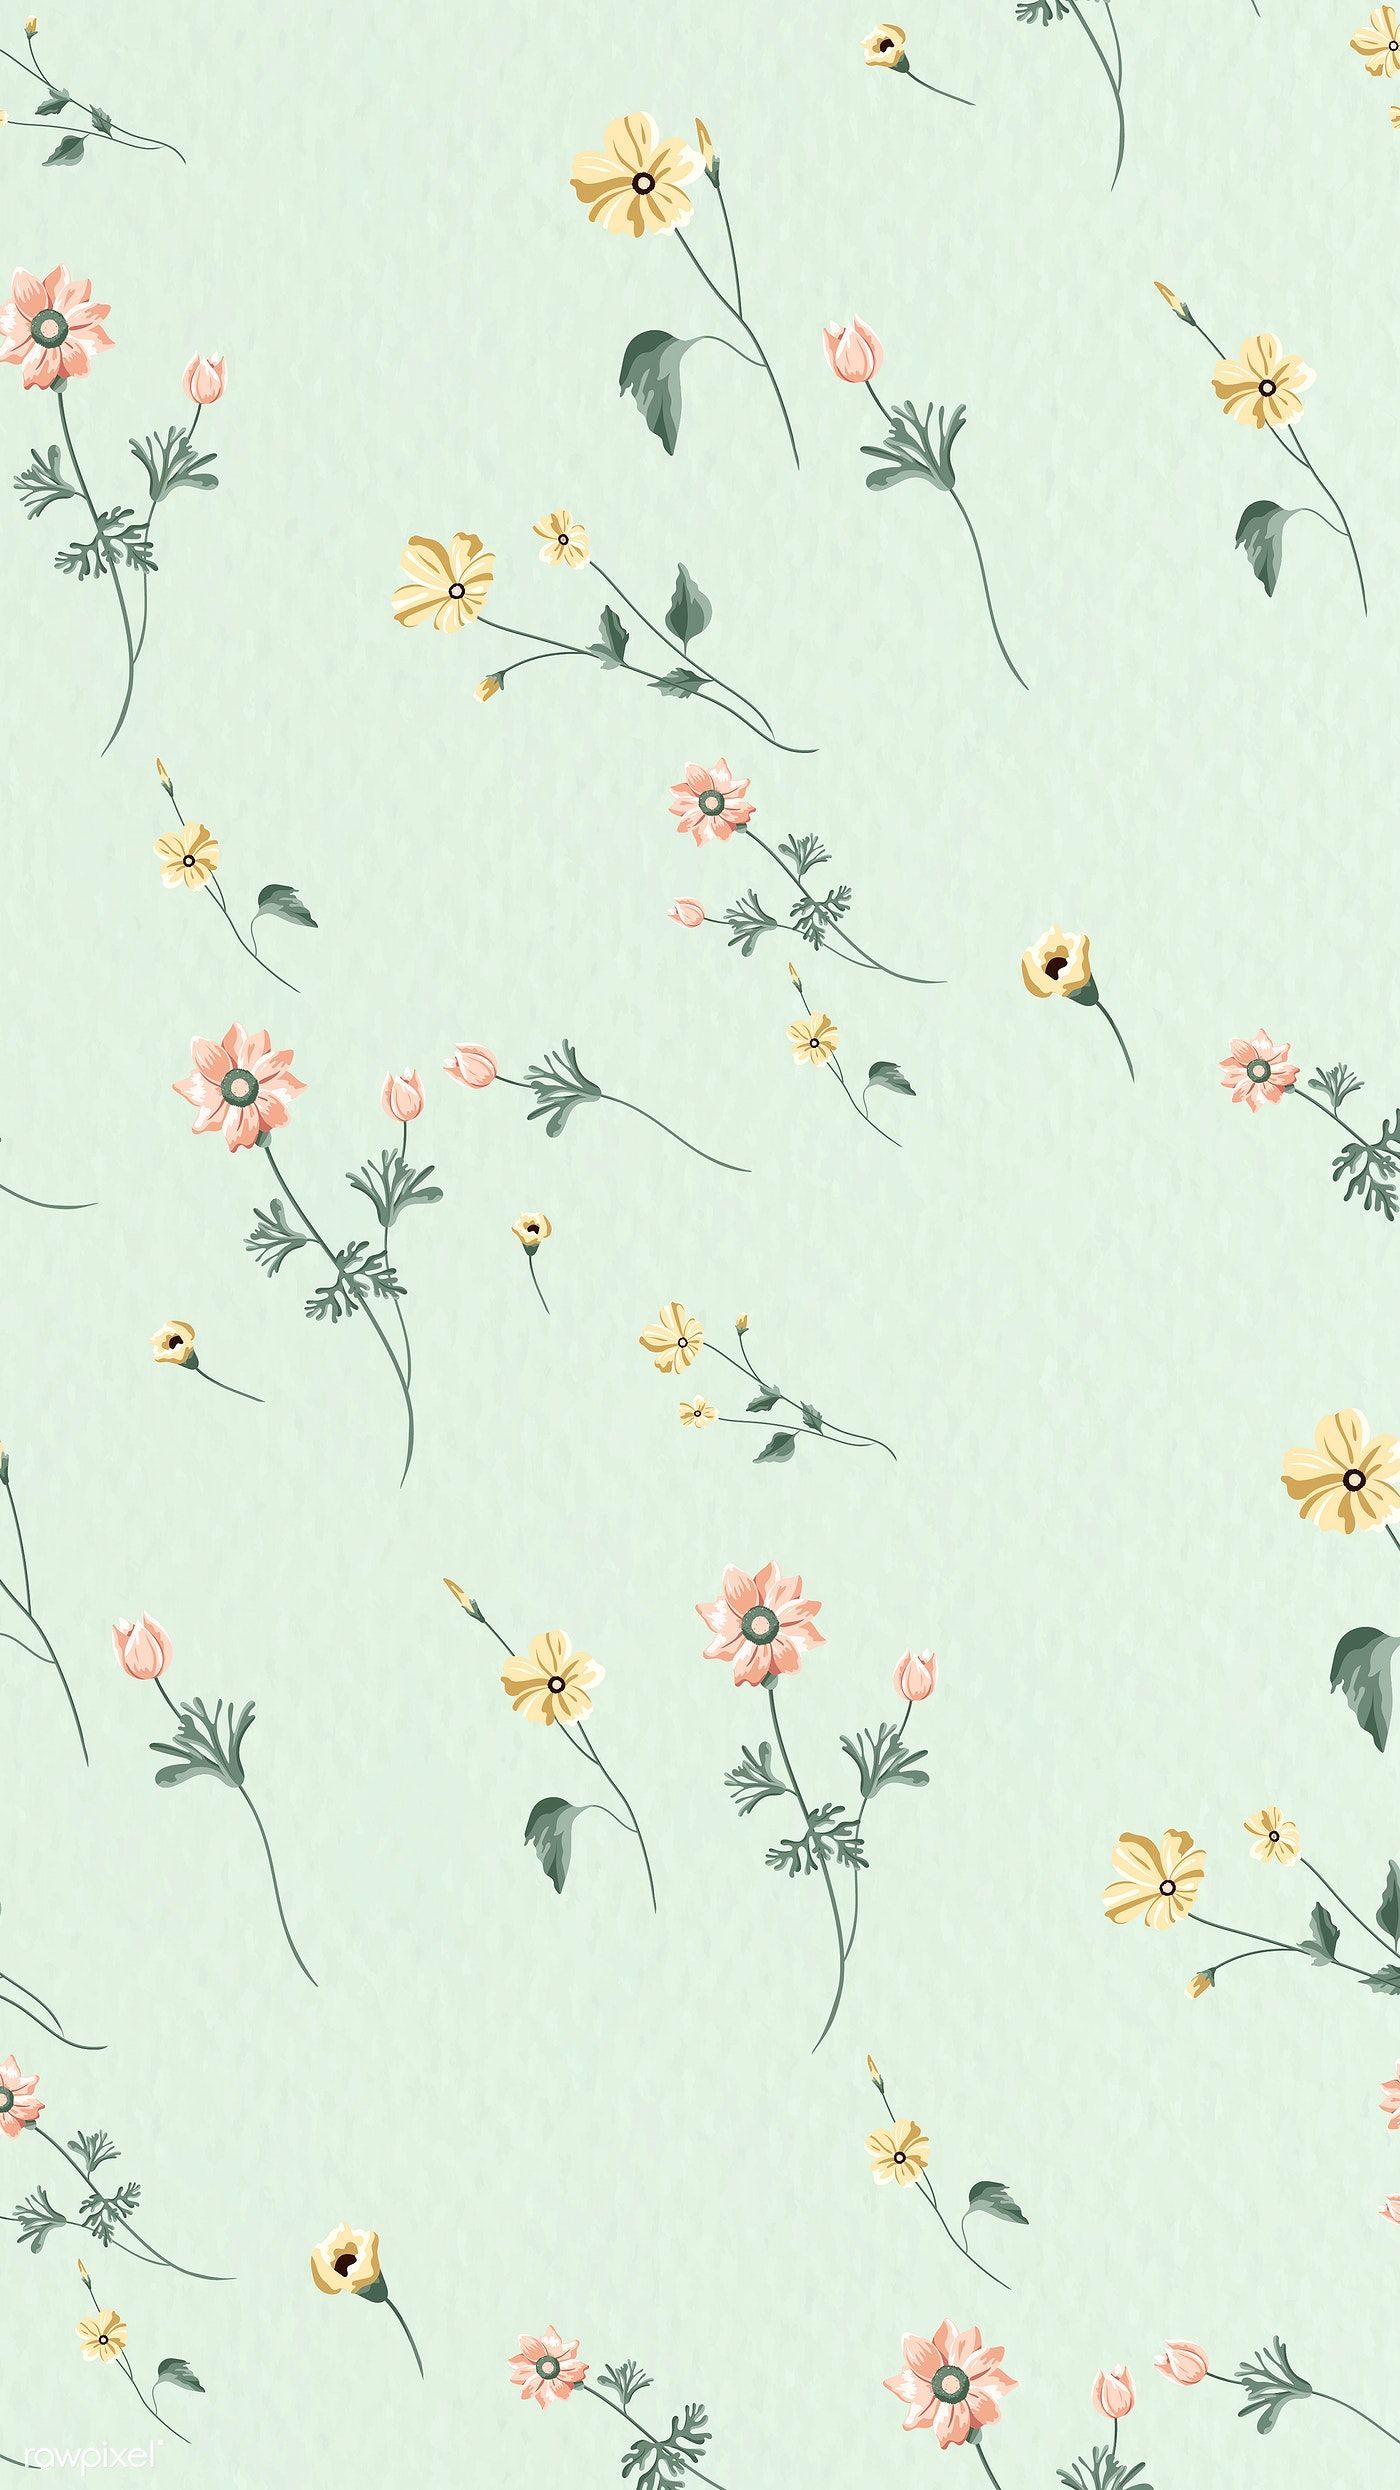 Mint Green Aesthetic Wallpaper Ipad : Mint Green Aesthetic Collage ...